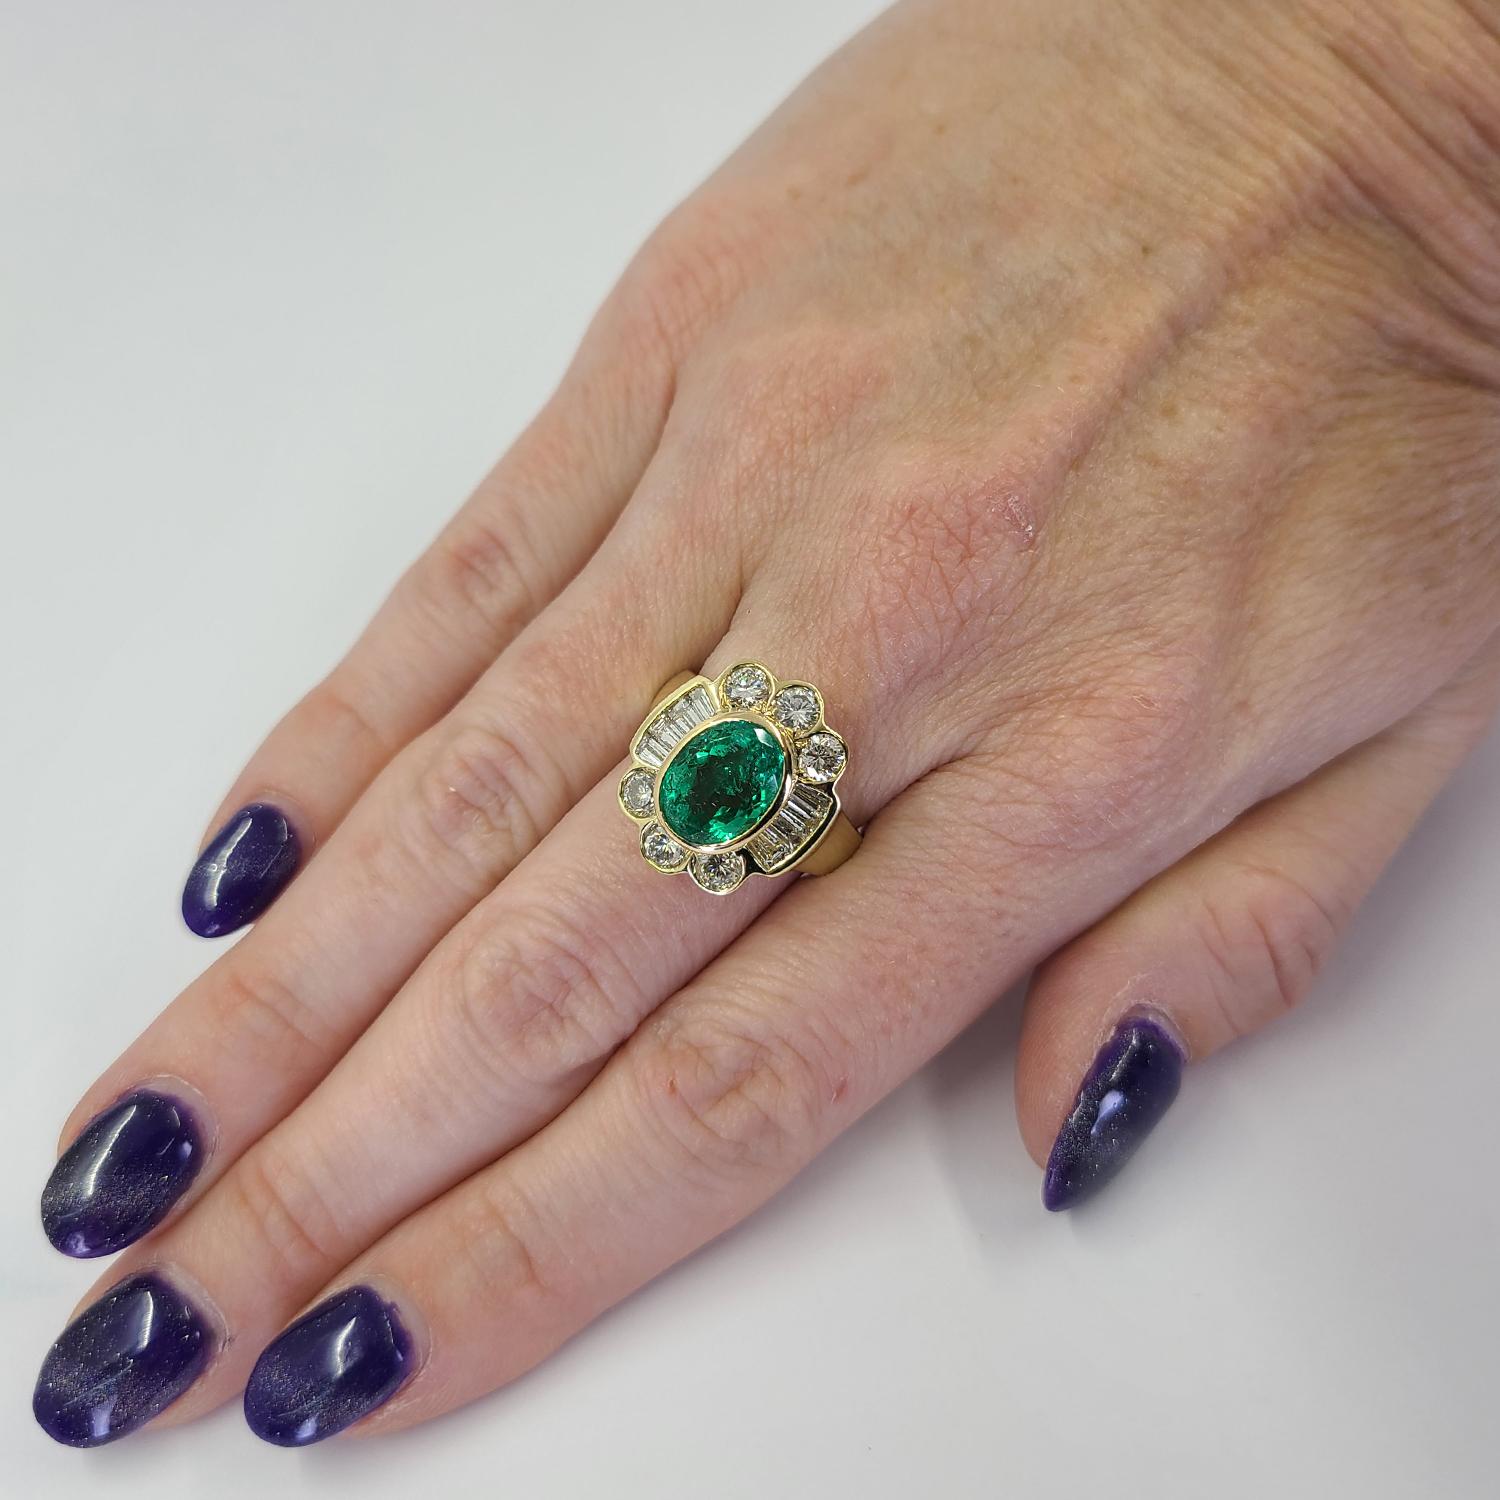 Stunning 18 Karat Yellow Gold Ring Featuring A Bezel Set 2.76 Carat Oval Cut Colombian Emerald (GIA Report #2221713611) Accented By 14 Round and Tapered Baguette Cut Diamonds of VS/SI Clarity and G/H Color Totaling 1.76 Carats. Finger Size 8;